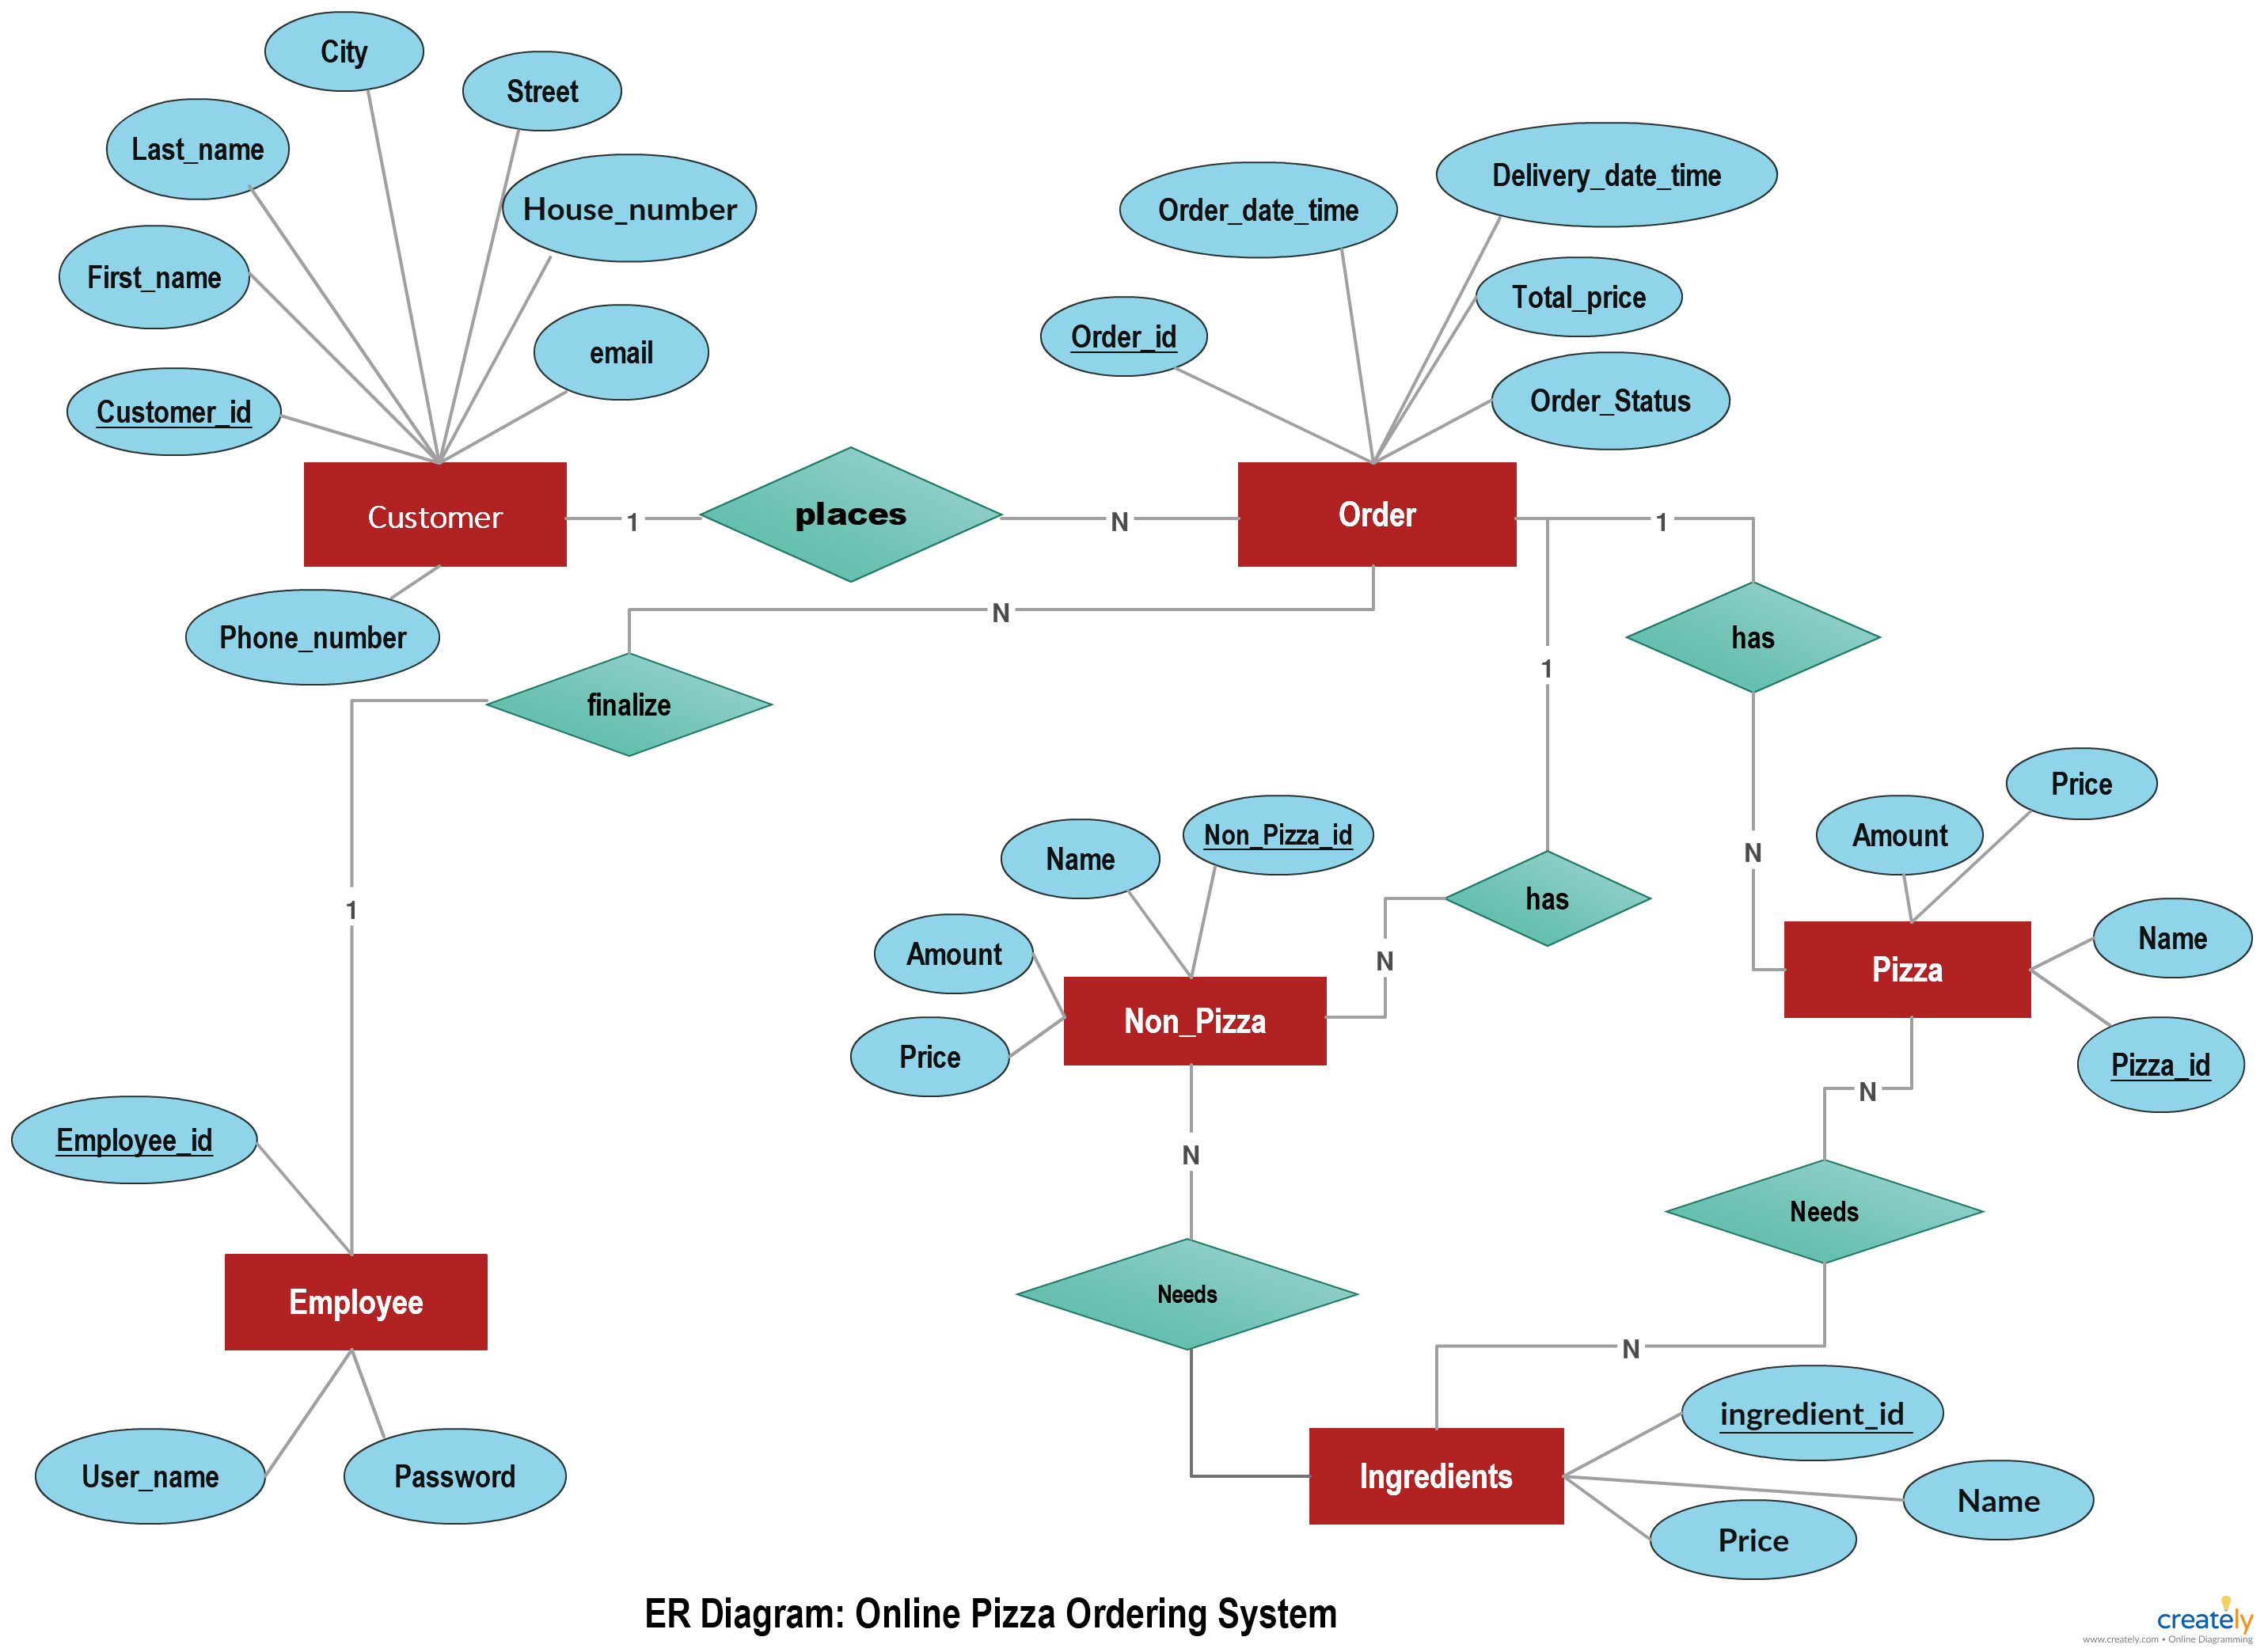 Online Pizza Ordering System Illustrated Using An Er Diagram. An Erd with Er Diagram Examples For Travel Agency